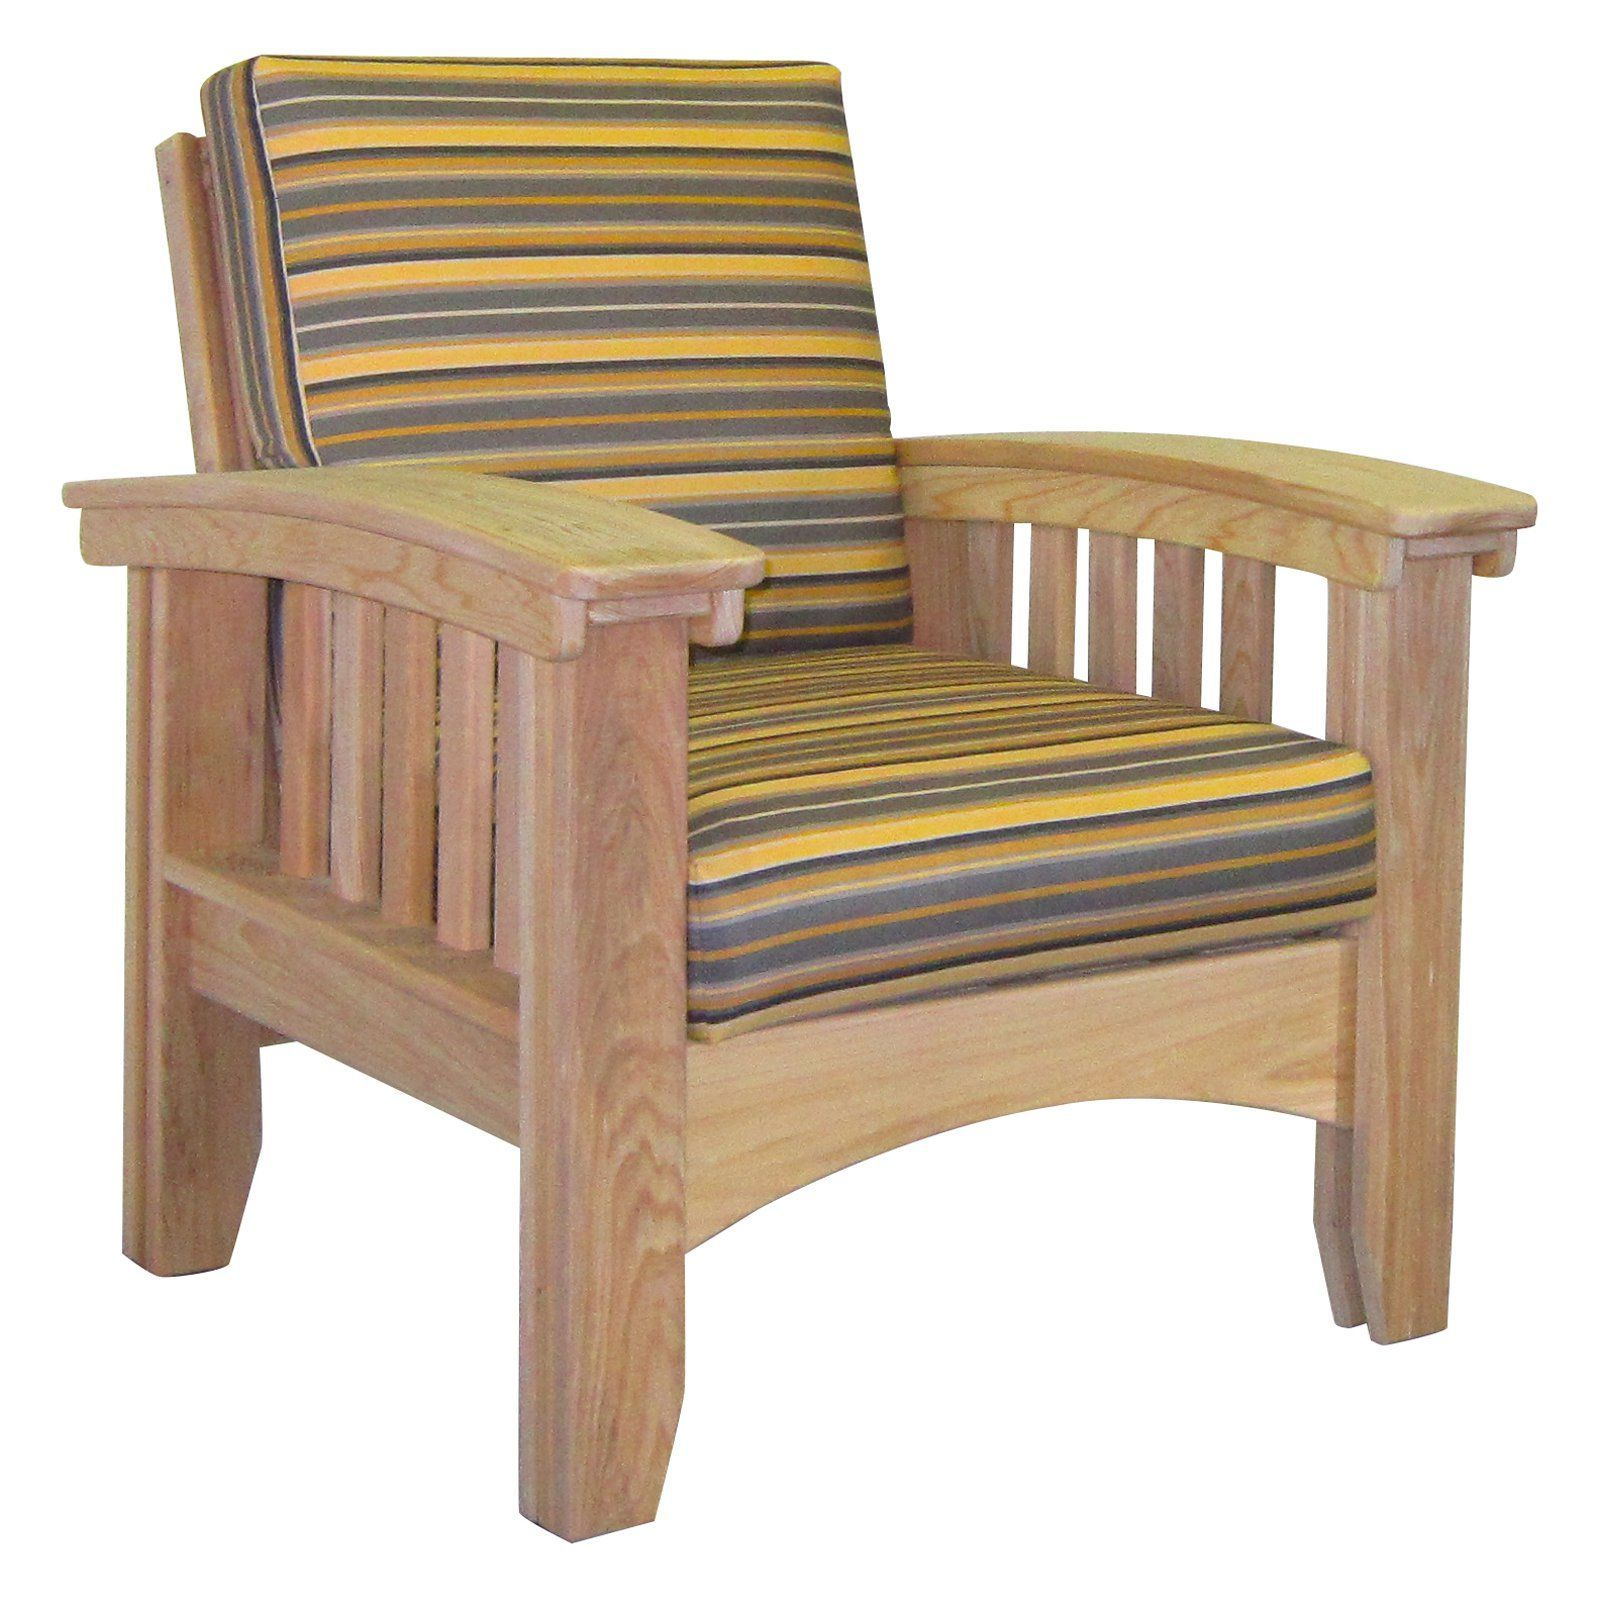 Outdoor Hershy Way Cypress Deep Seating Wood Patio Mission pertaining to size 1600 X 1600